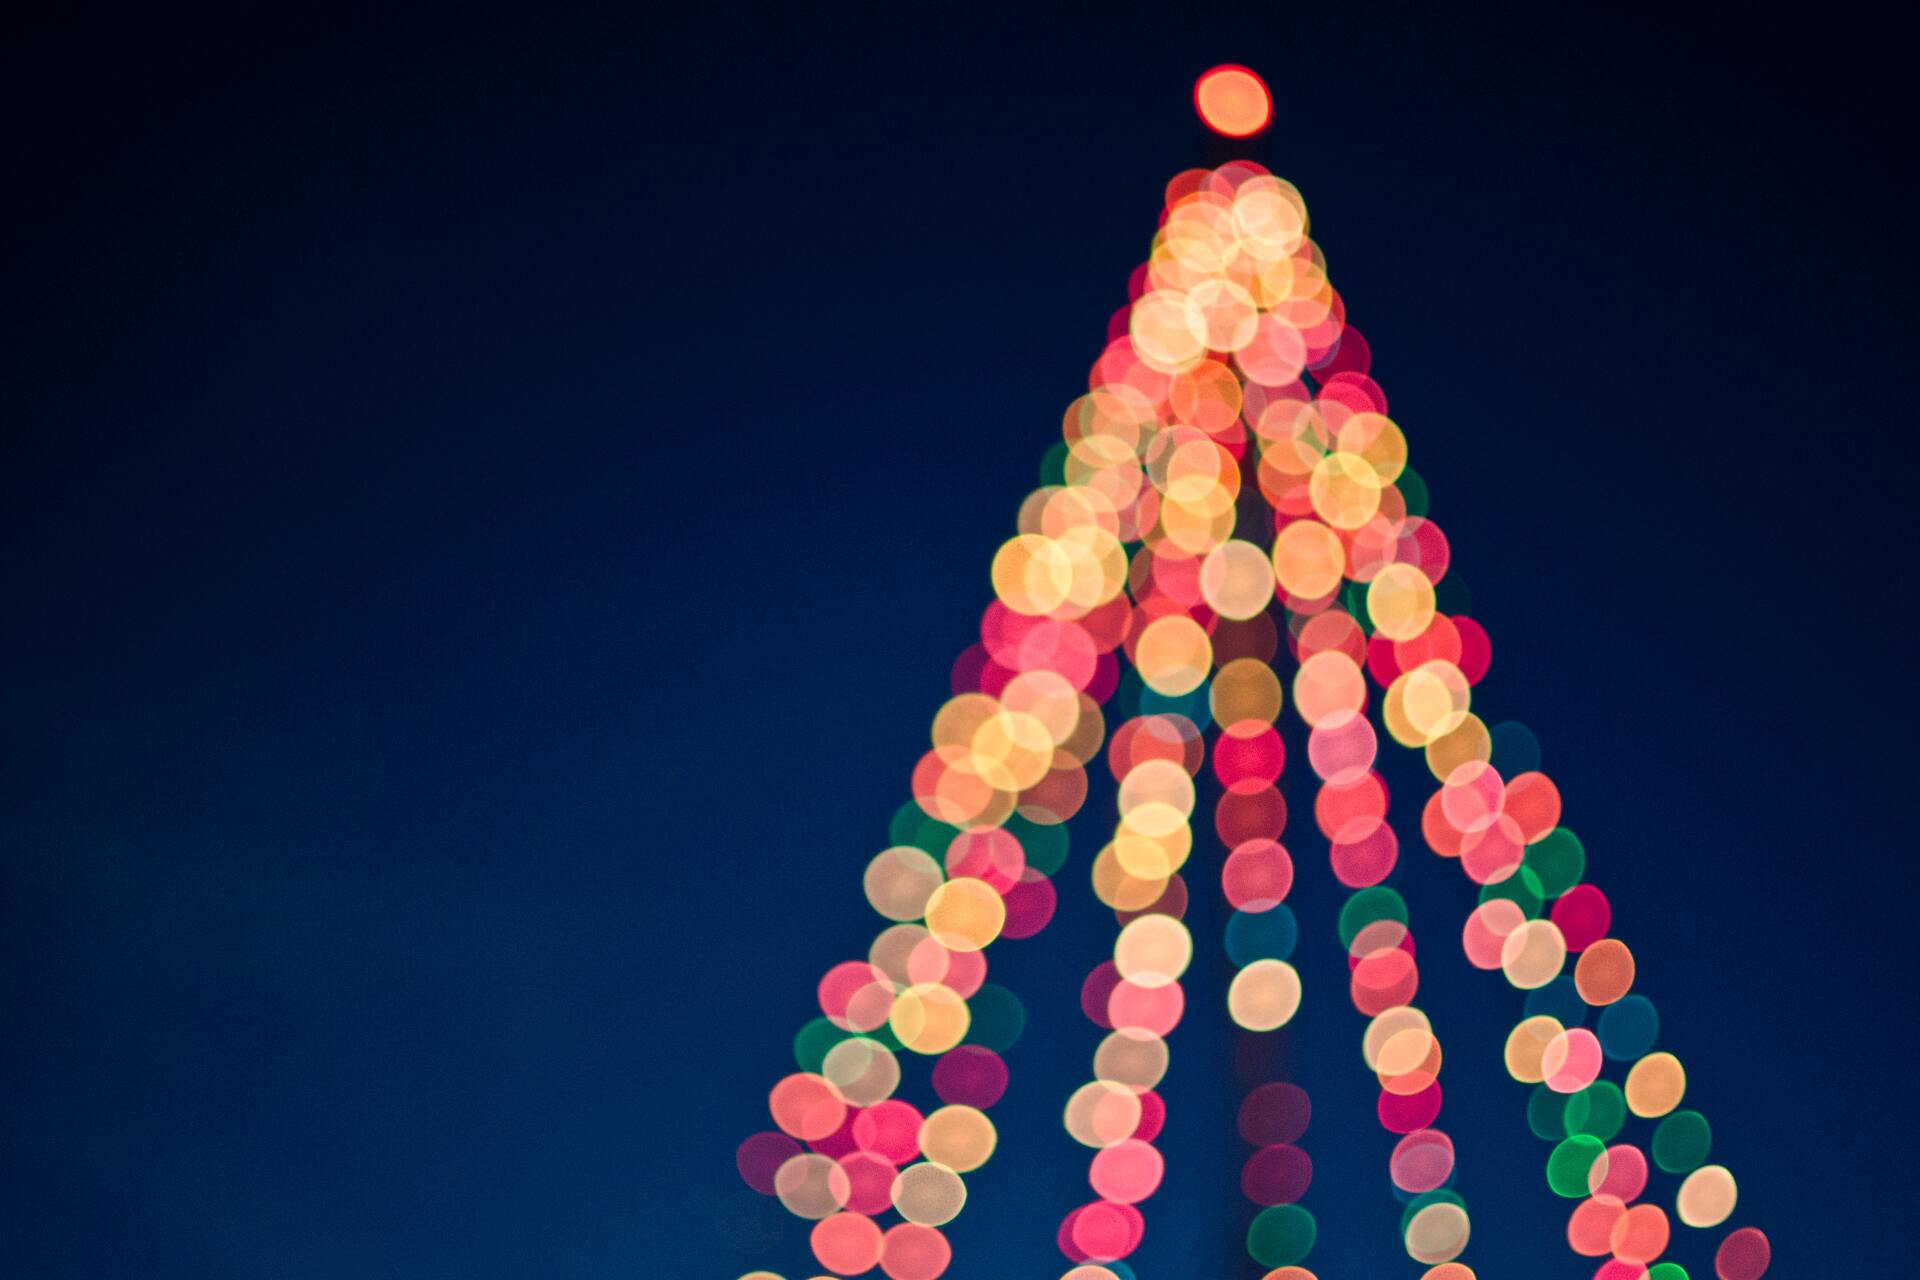 A bokeh effect on a photo of a large Christmas tree covered in lights.